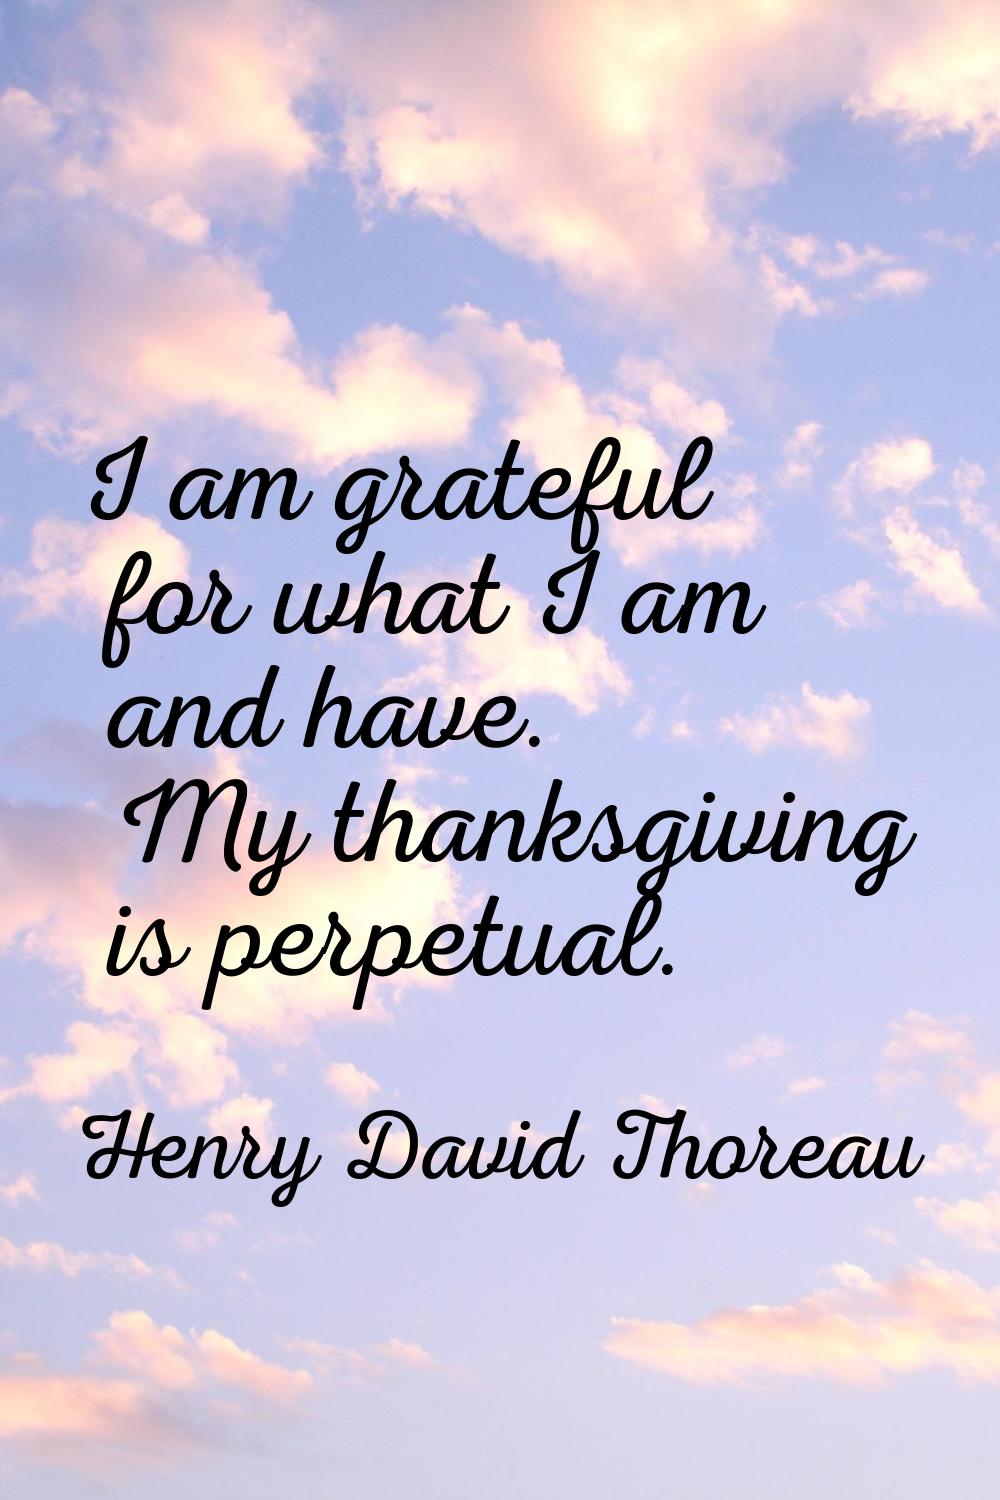 I am grateful for what I am and have. My thanksgiving is perpetual.